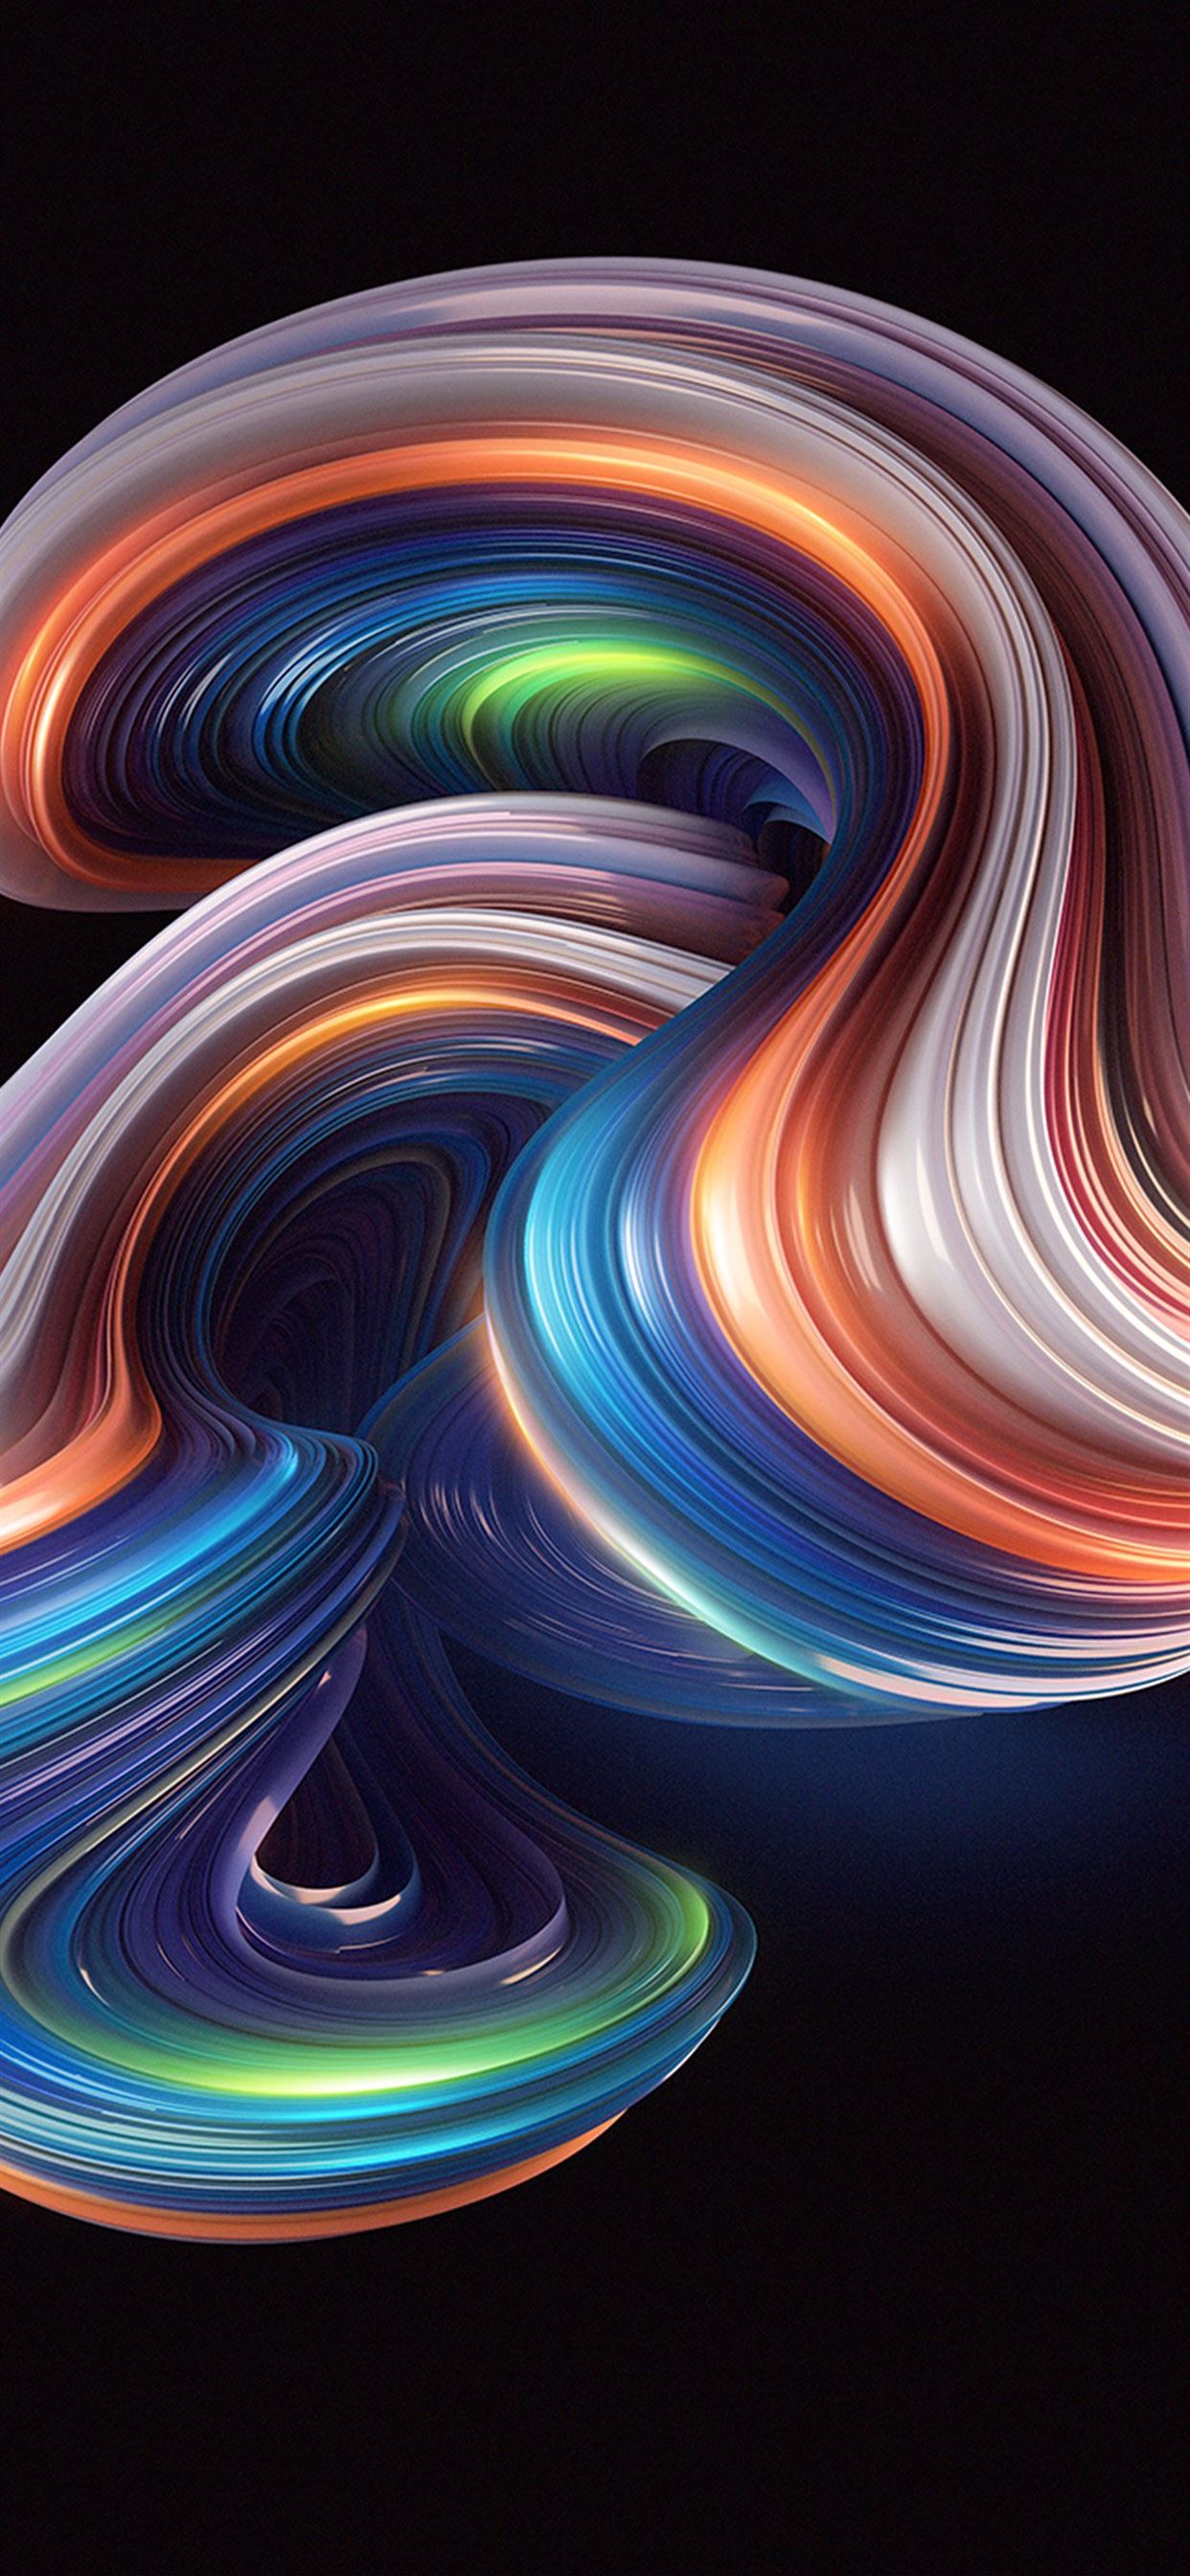 Curve shape color abstract pattern background iPhone X Wallpapers Free  Download